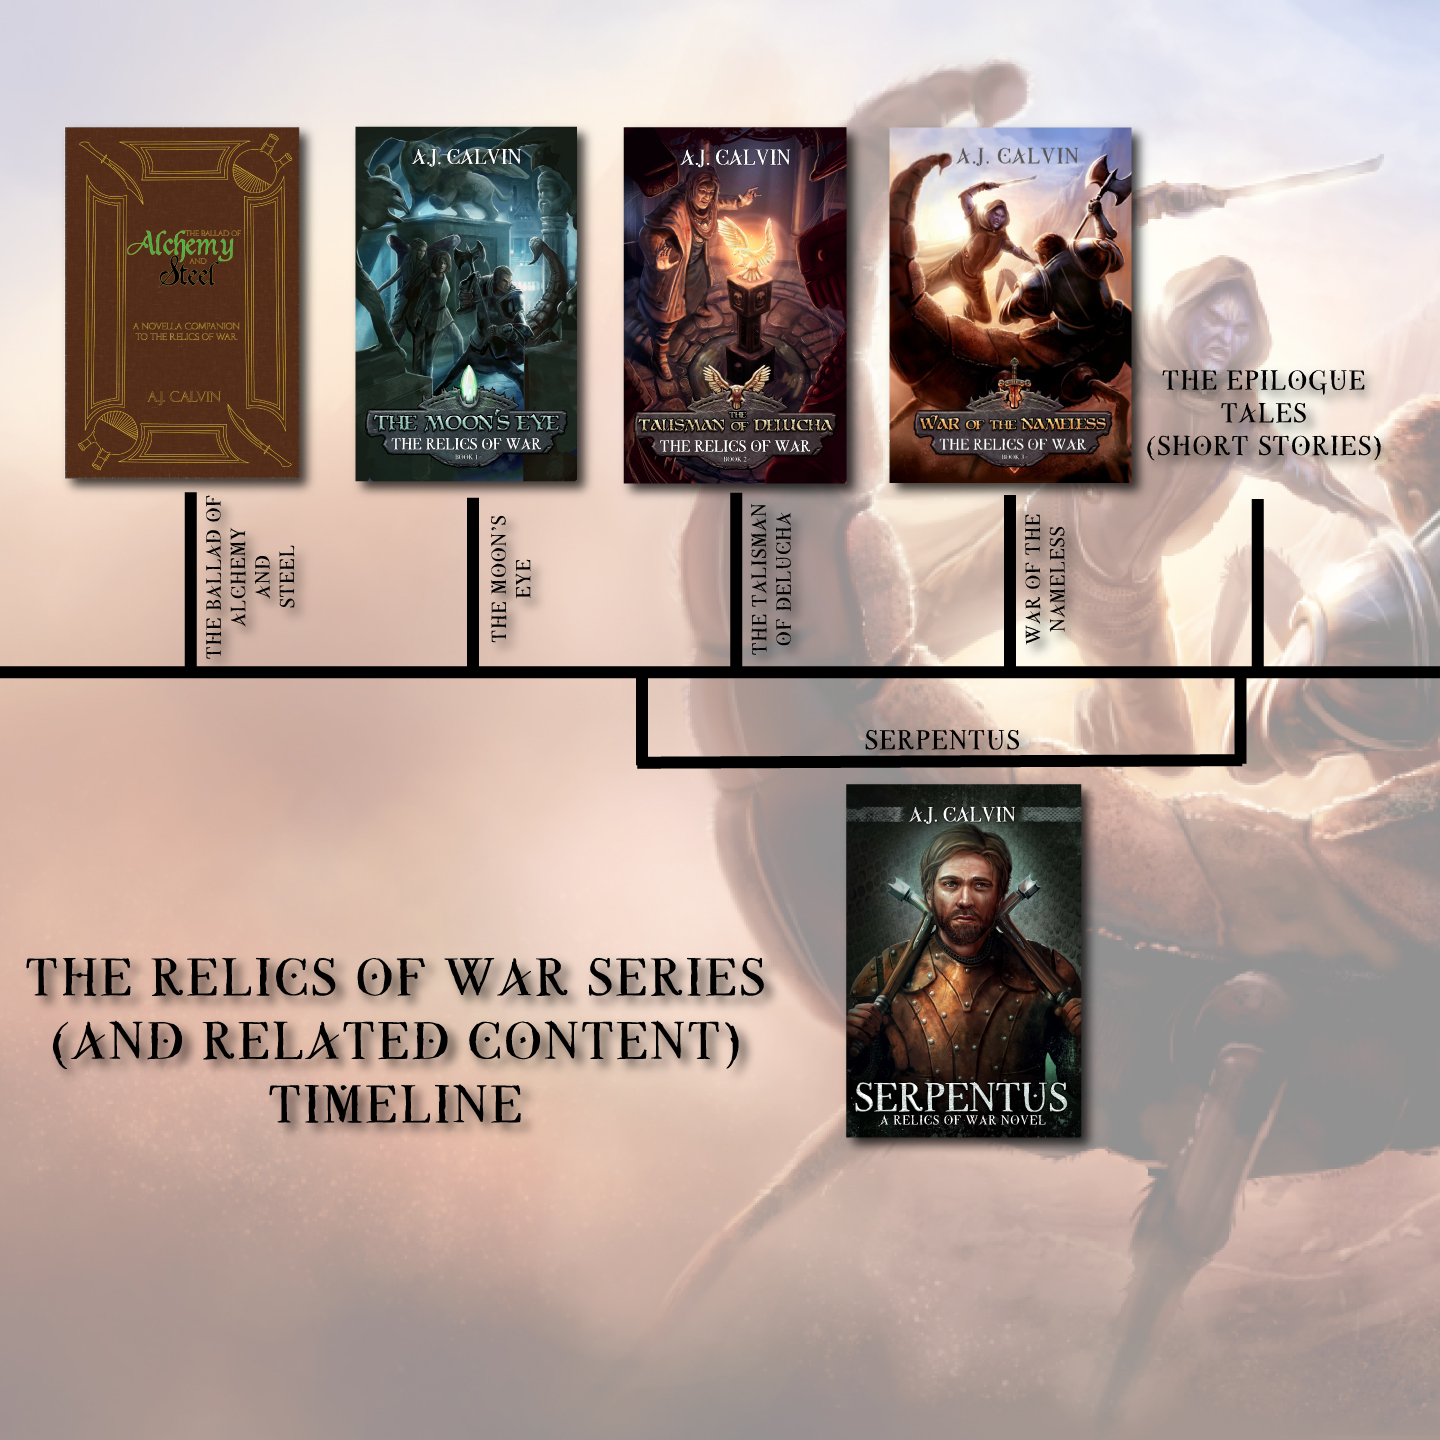 The Relics of War (Series and Related Content) Timelines